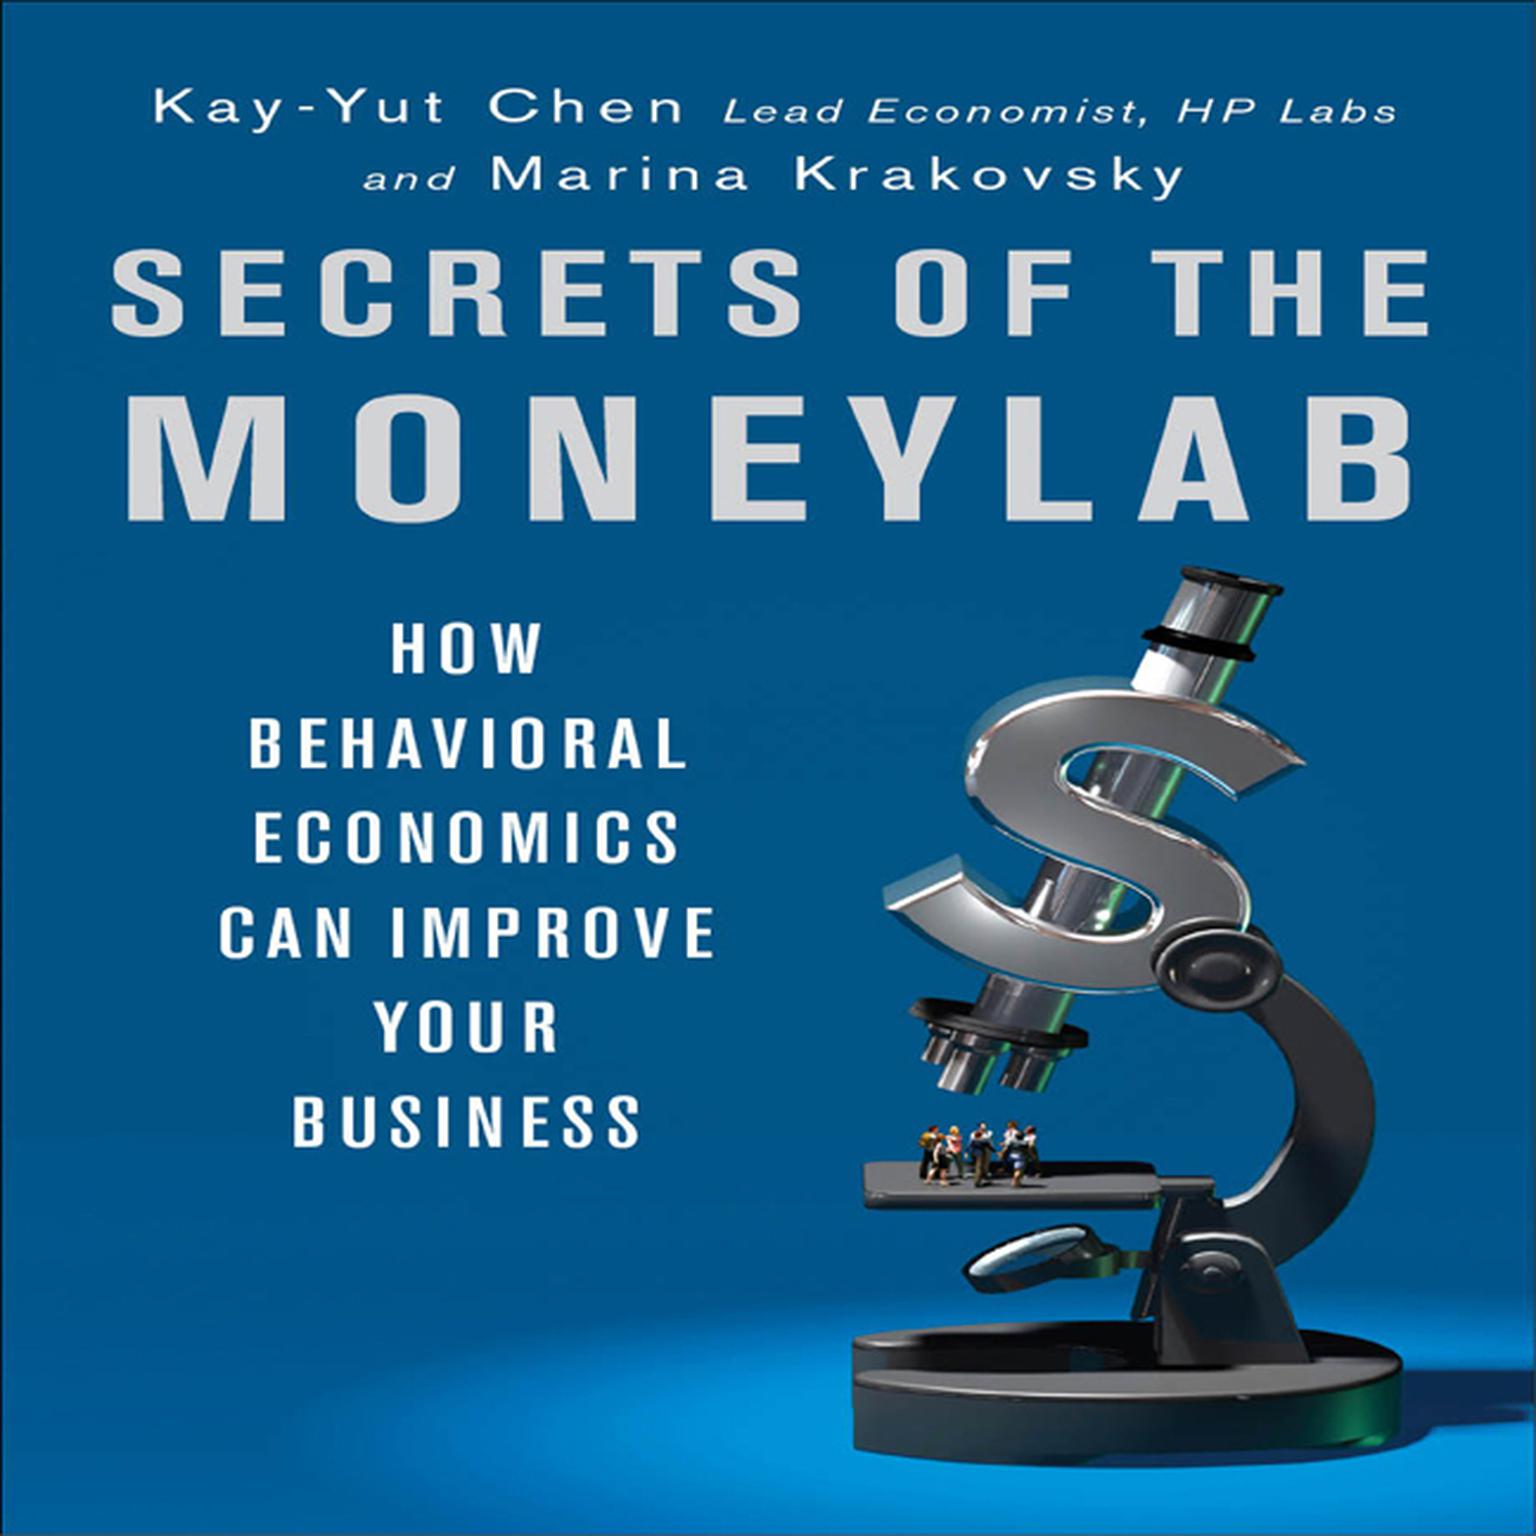 Secrets of the Moneylab: How Behavioral Economics Can Improve Your Business Audiobook, by Kay-Yut Chen